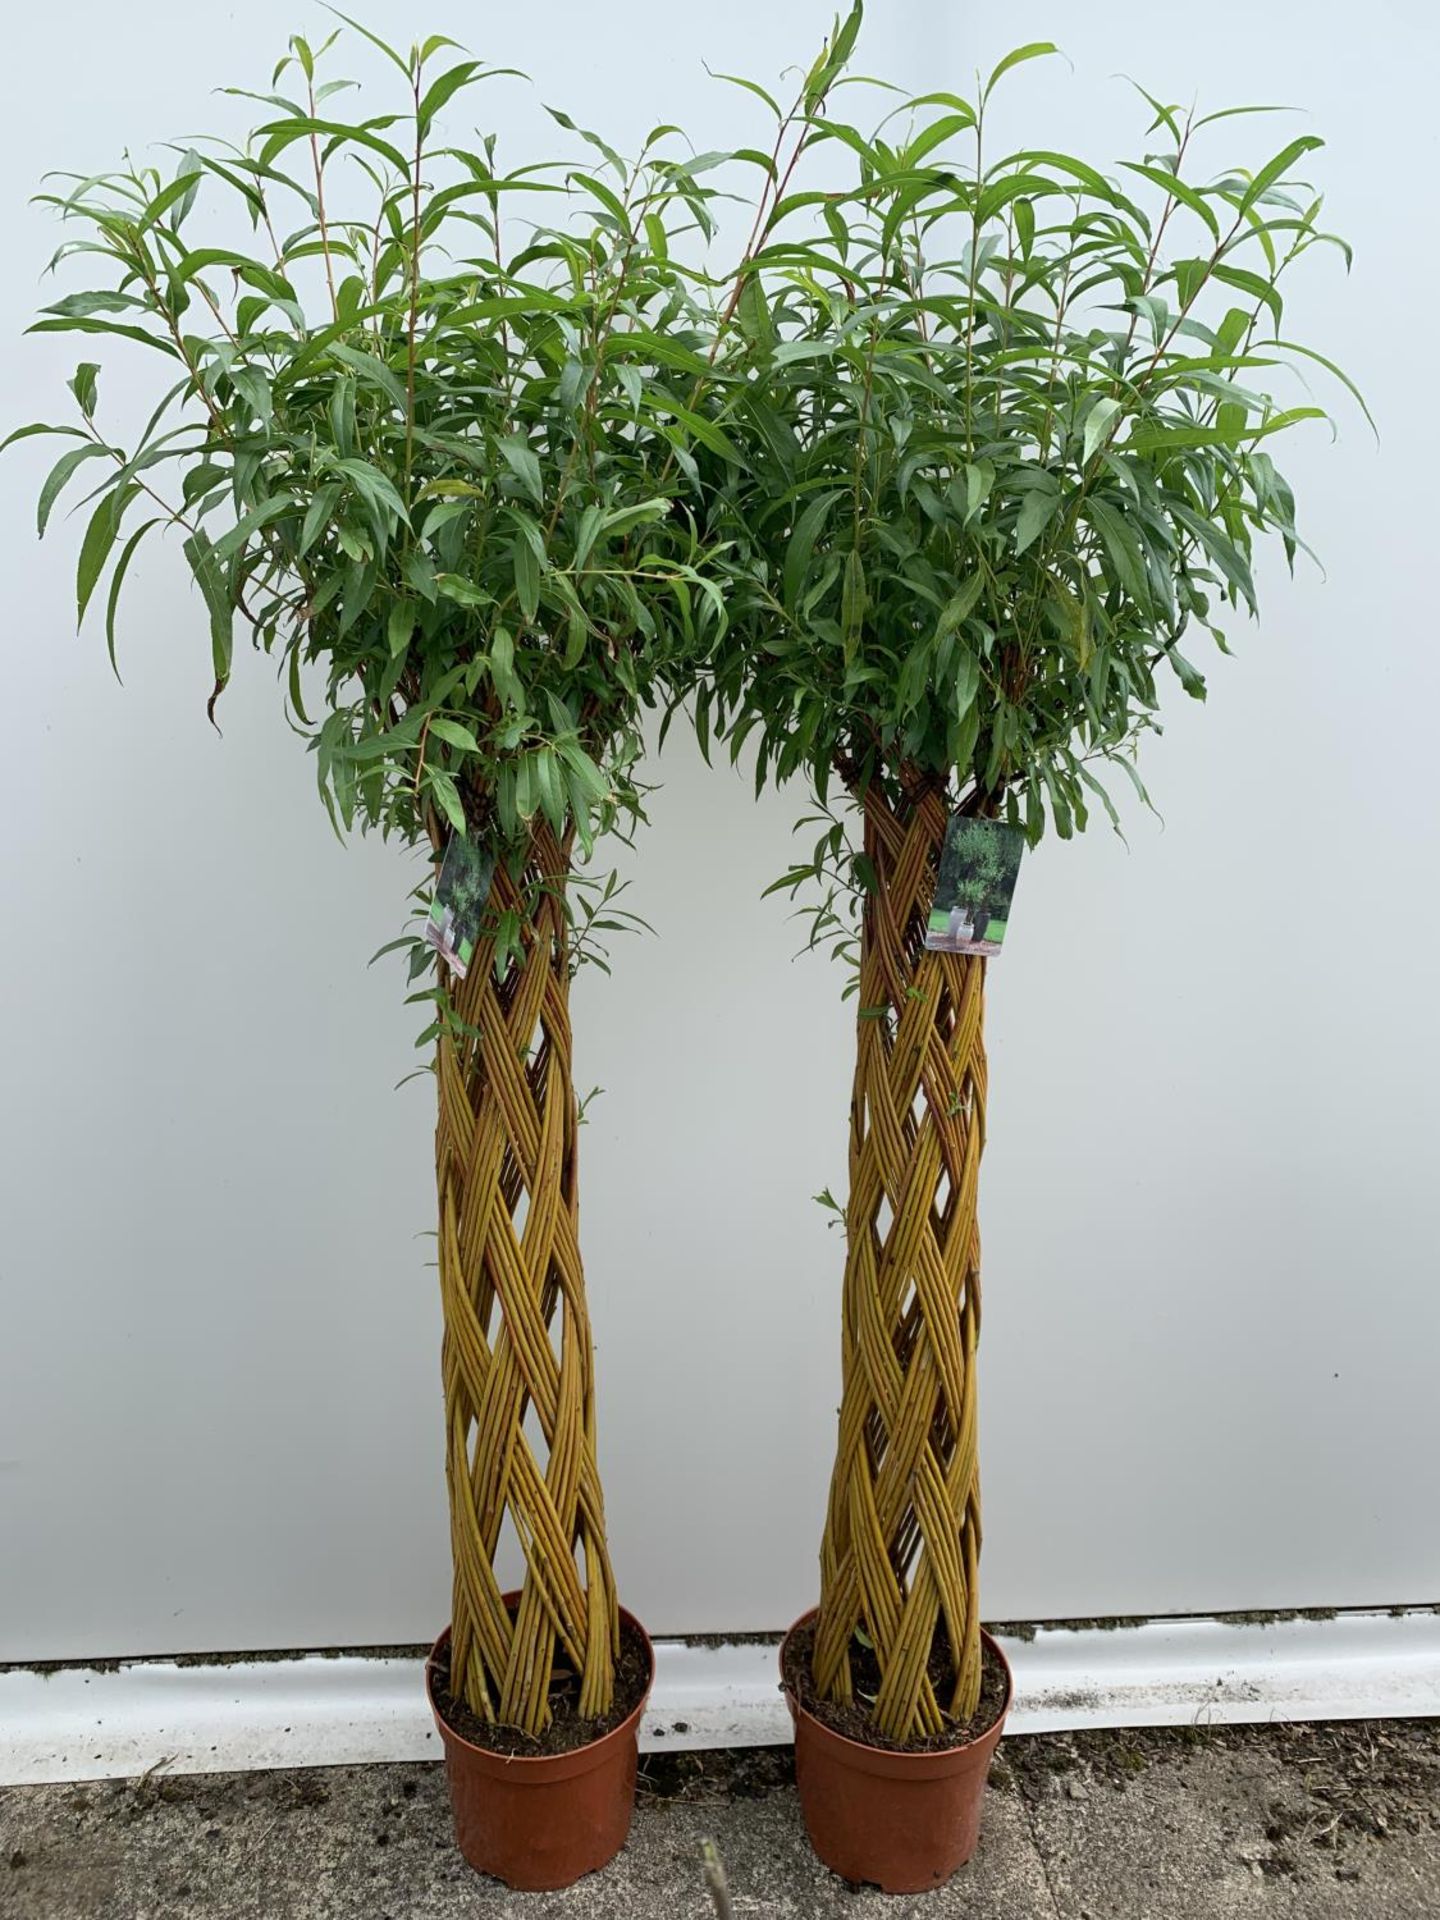 TWO SALIX LIVING WILLOW TREES IN 7.5 LTR POTS OVER 2 METRES IN HEIGHT TO BE SOLD FOR THE TWO PLUS - Image 15 of 22